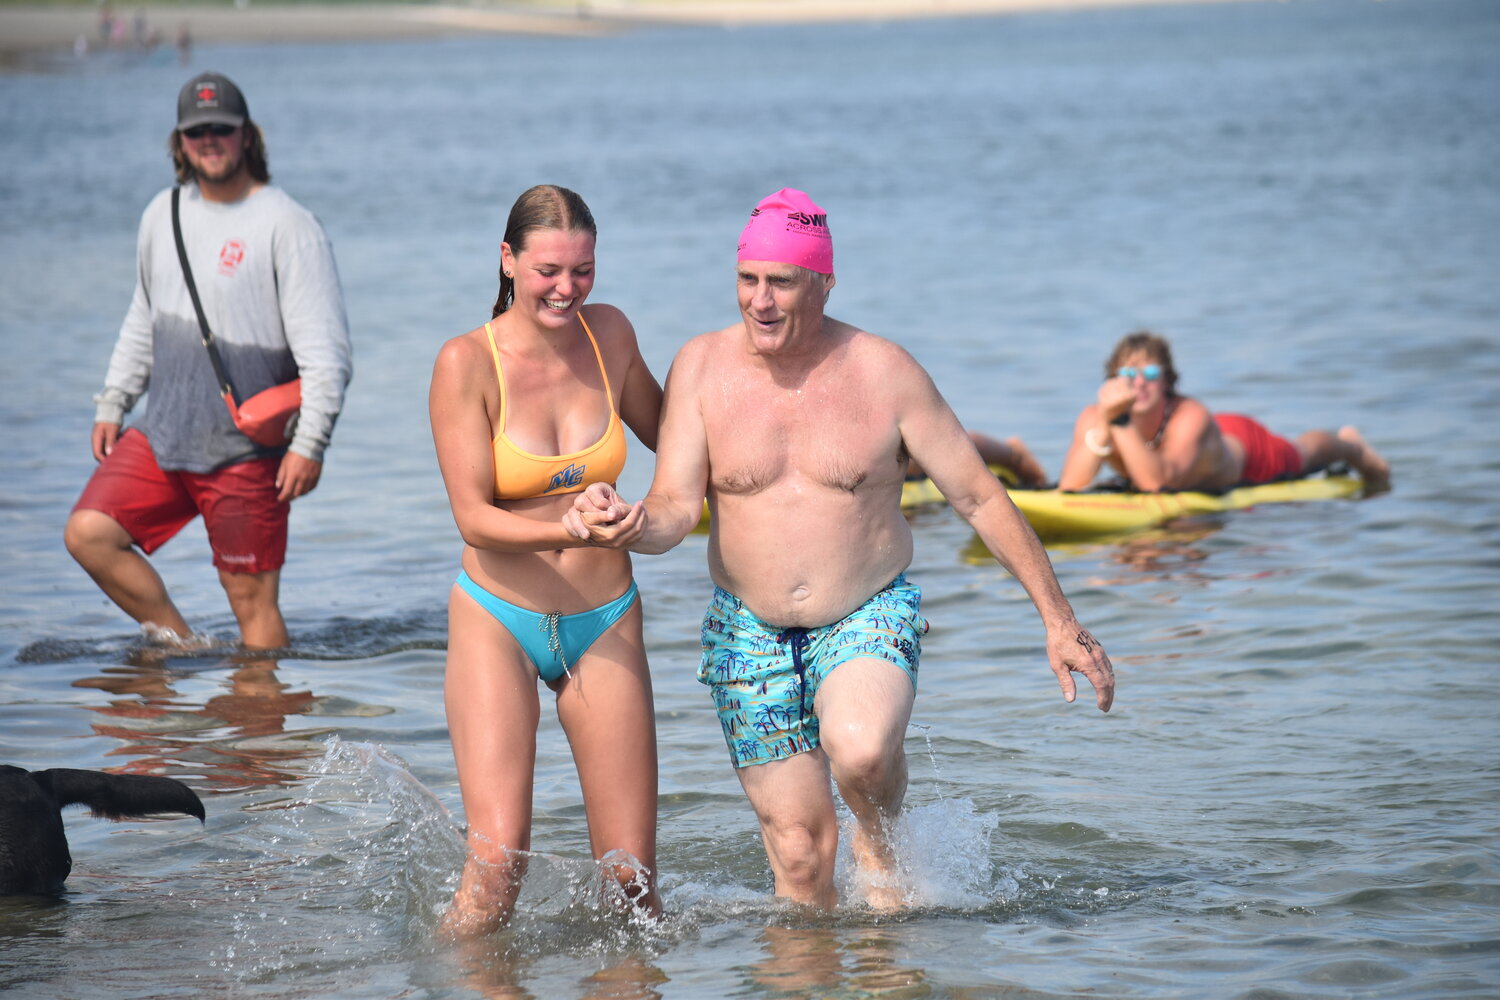 Saturday's Swim Across America-Nantucket open water swim at Jetties Beach raised $650,000 to benefit on-island cancer services.